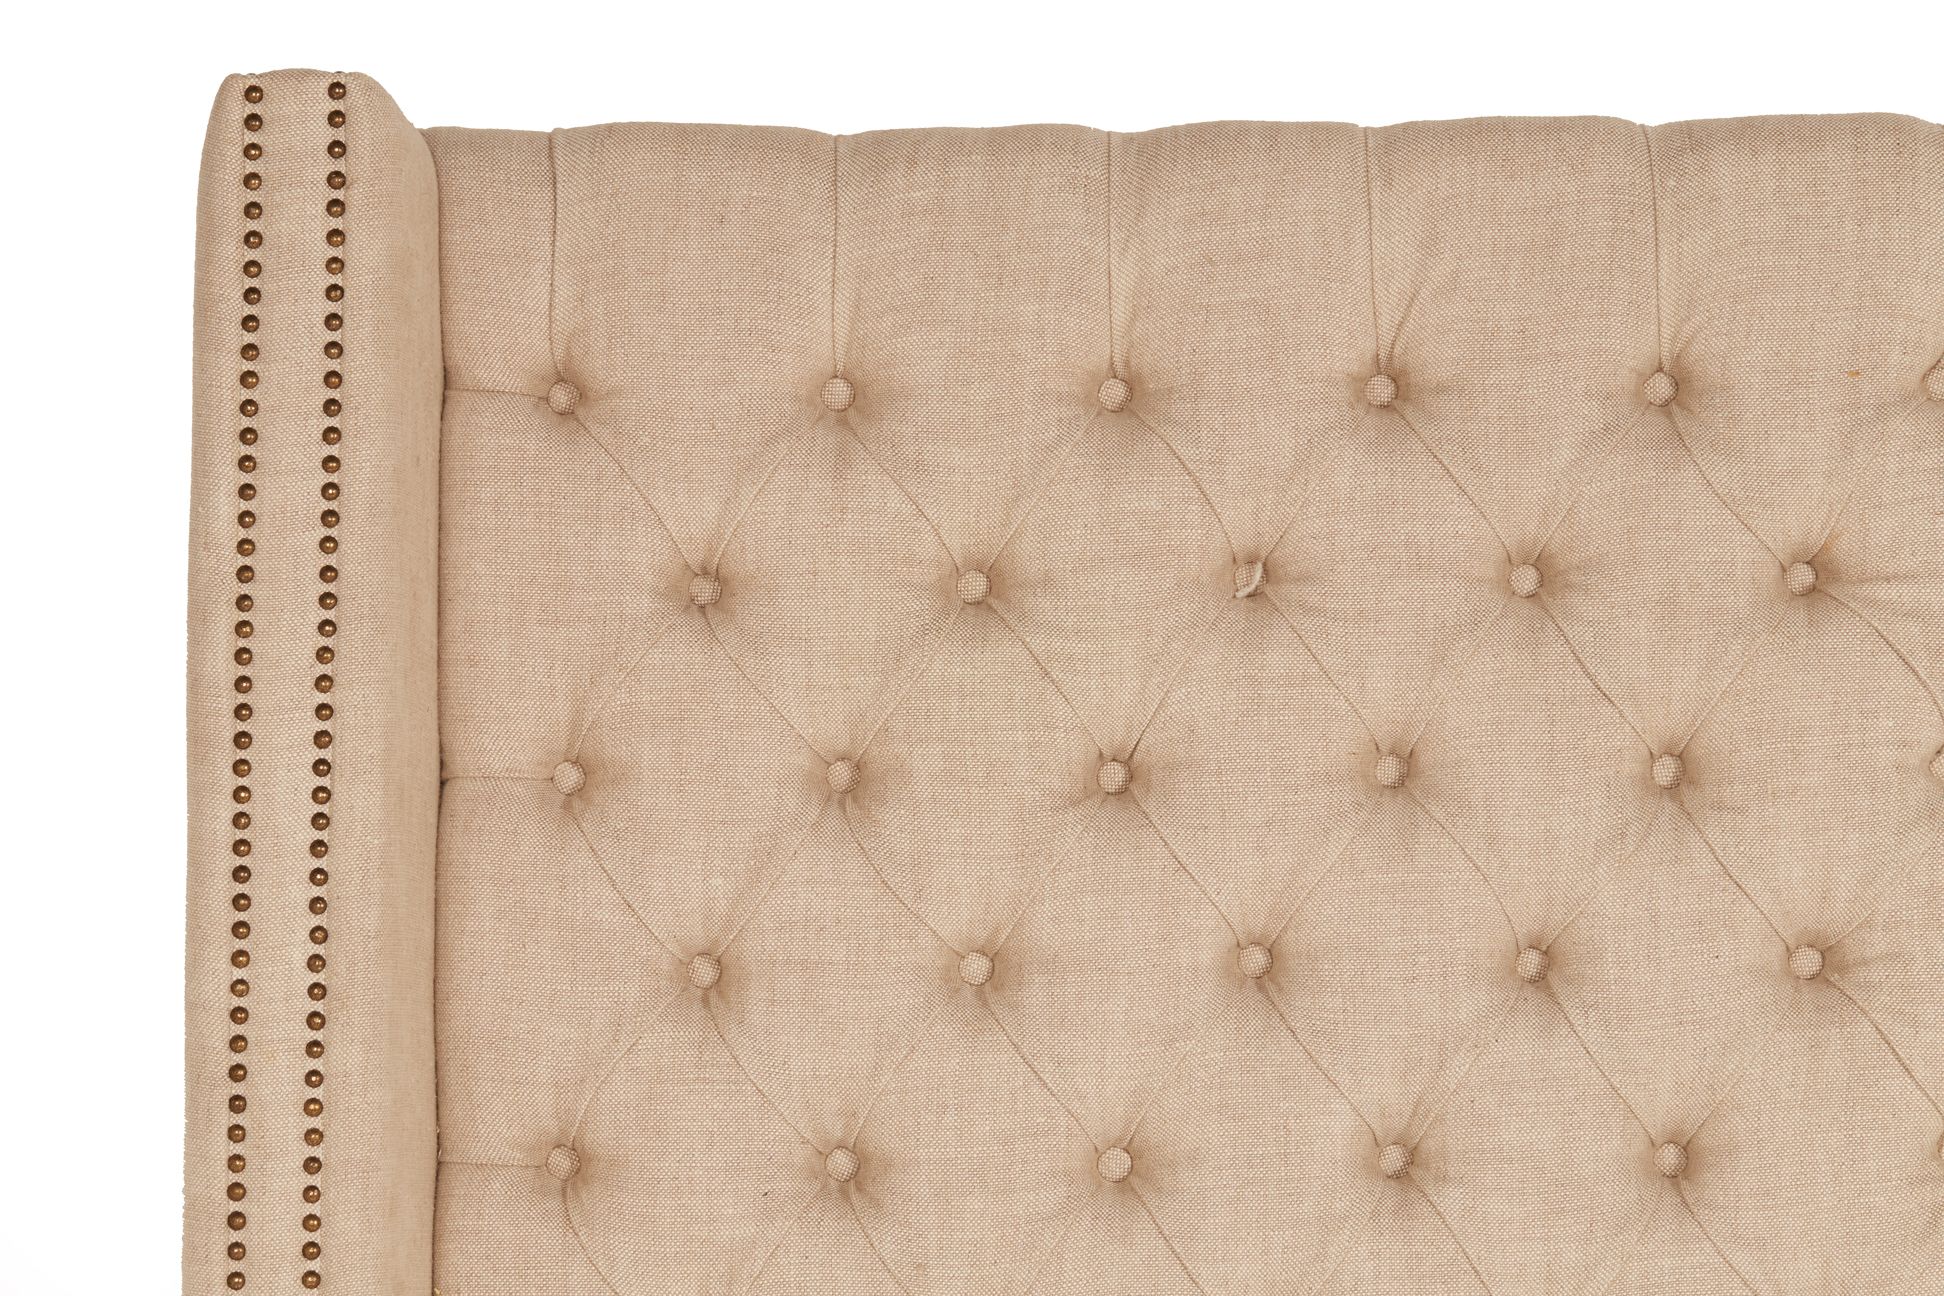 A TUFTED CREAM LINEN BUTTON BACKED HEADBOARD - Image 2 of 2